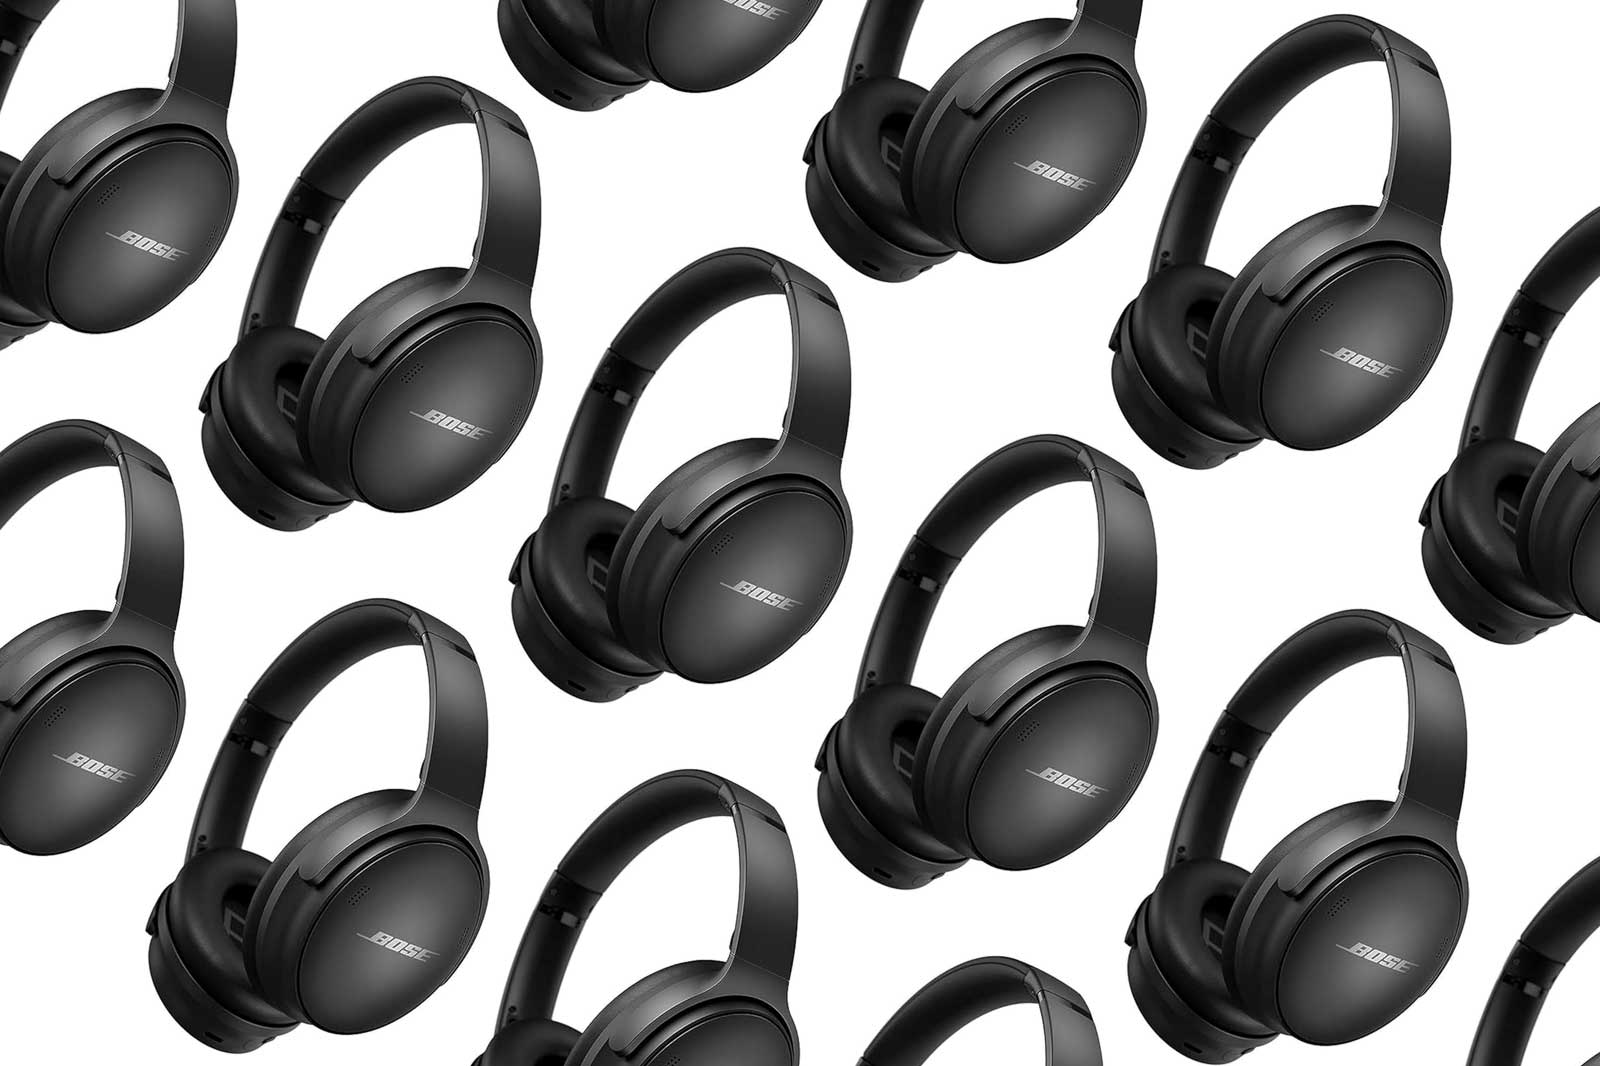 Get Bose noise-canceling headphones for their lowest prices ever during Amazon’s early Black Friday sale